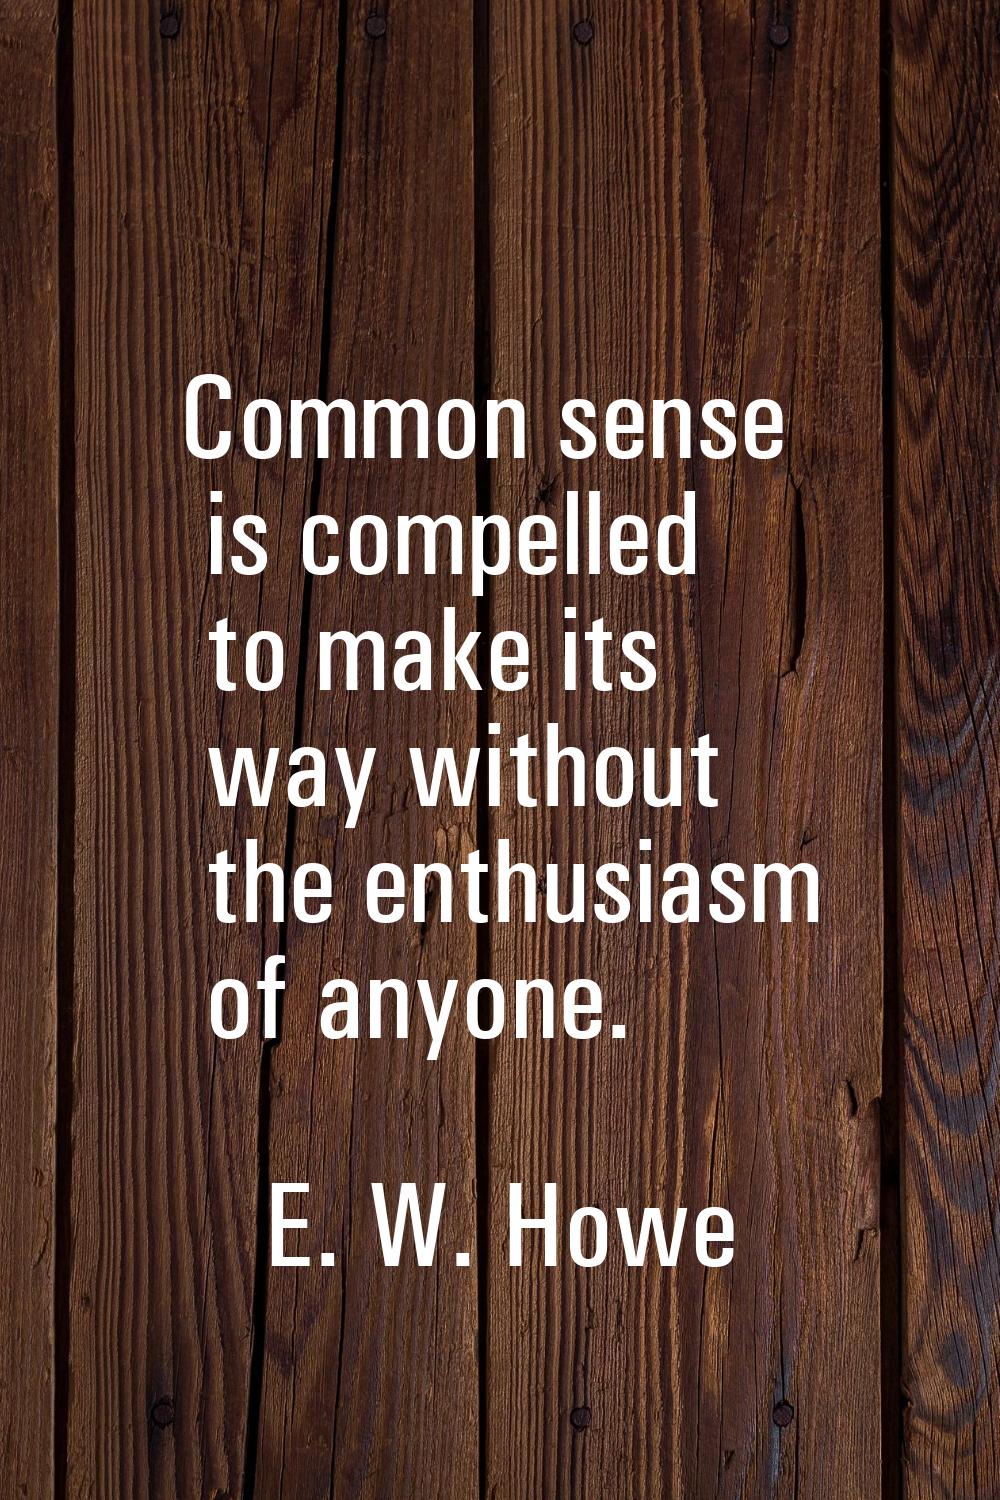 Common sense is compelled to make its way without the enthusiasm of anyone.